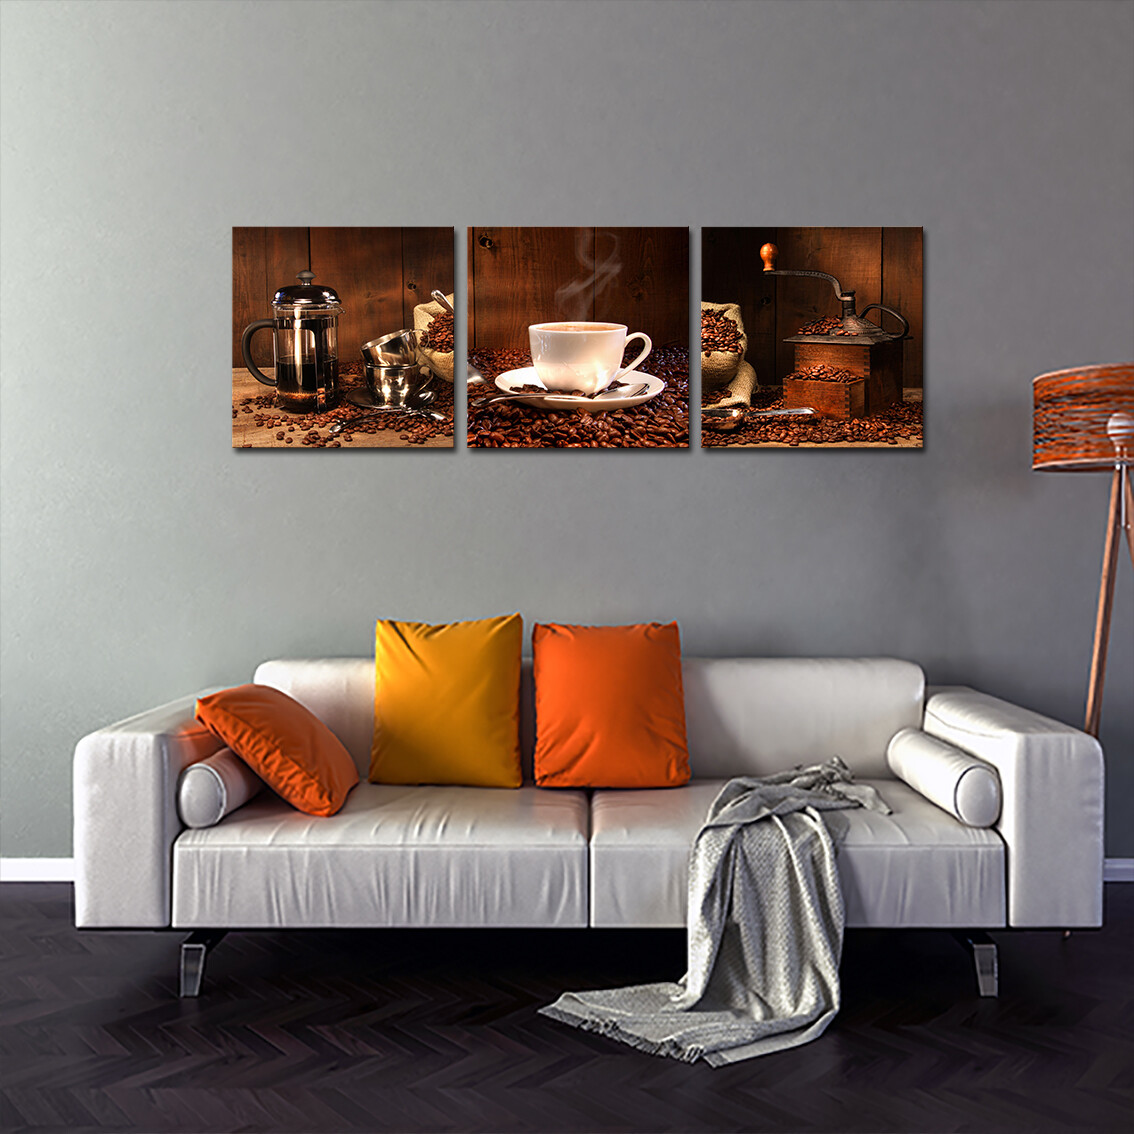 Coffee Break with Beans - Modern Luxury Wall art Printed on Acrylic Glass - Frameless and Ready to Hang